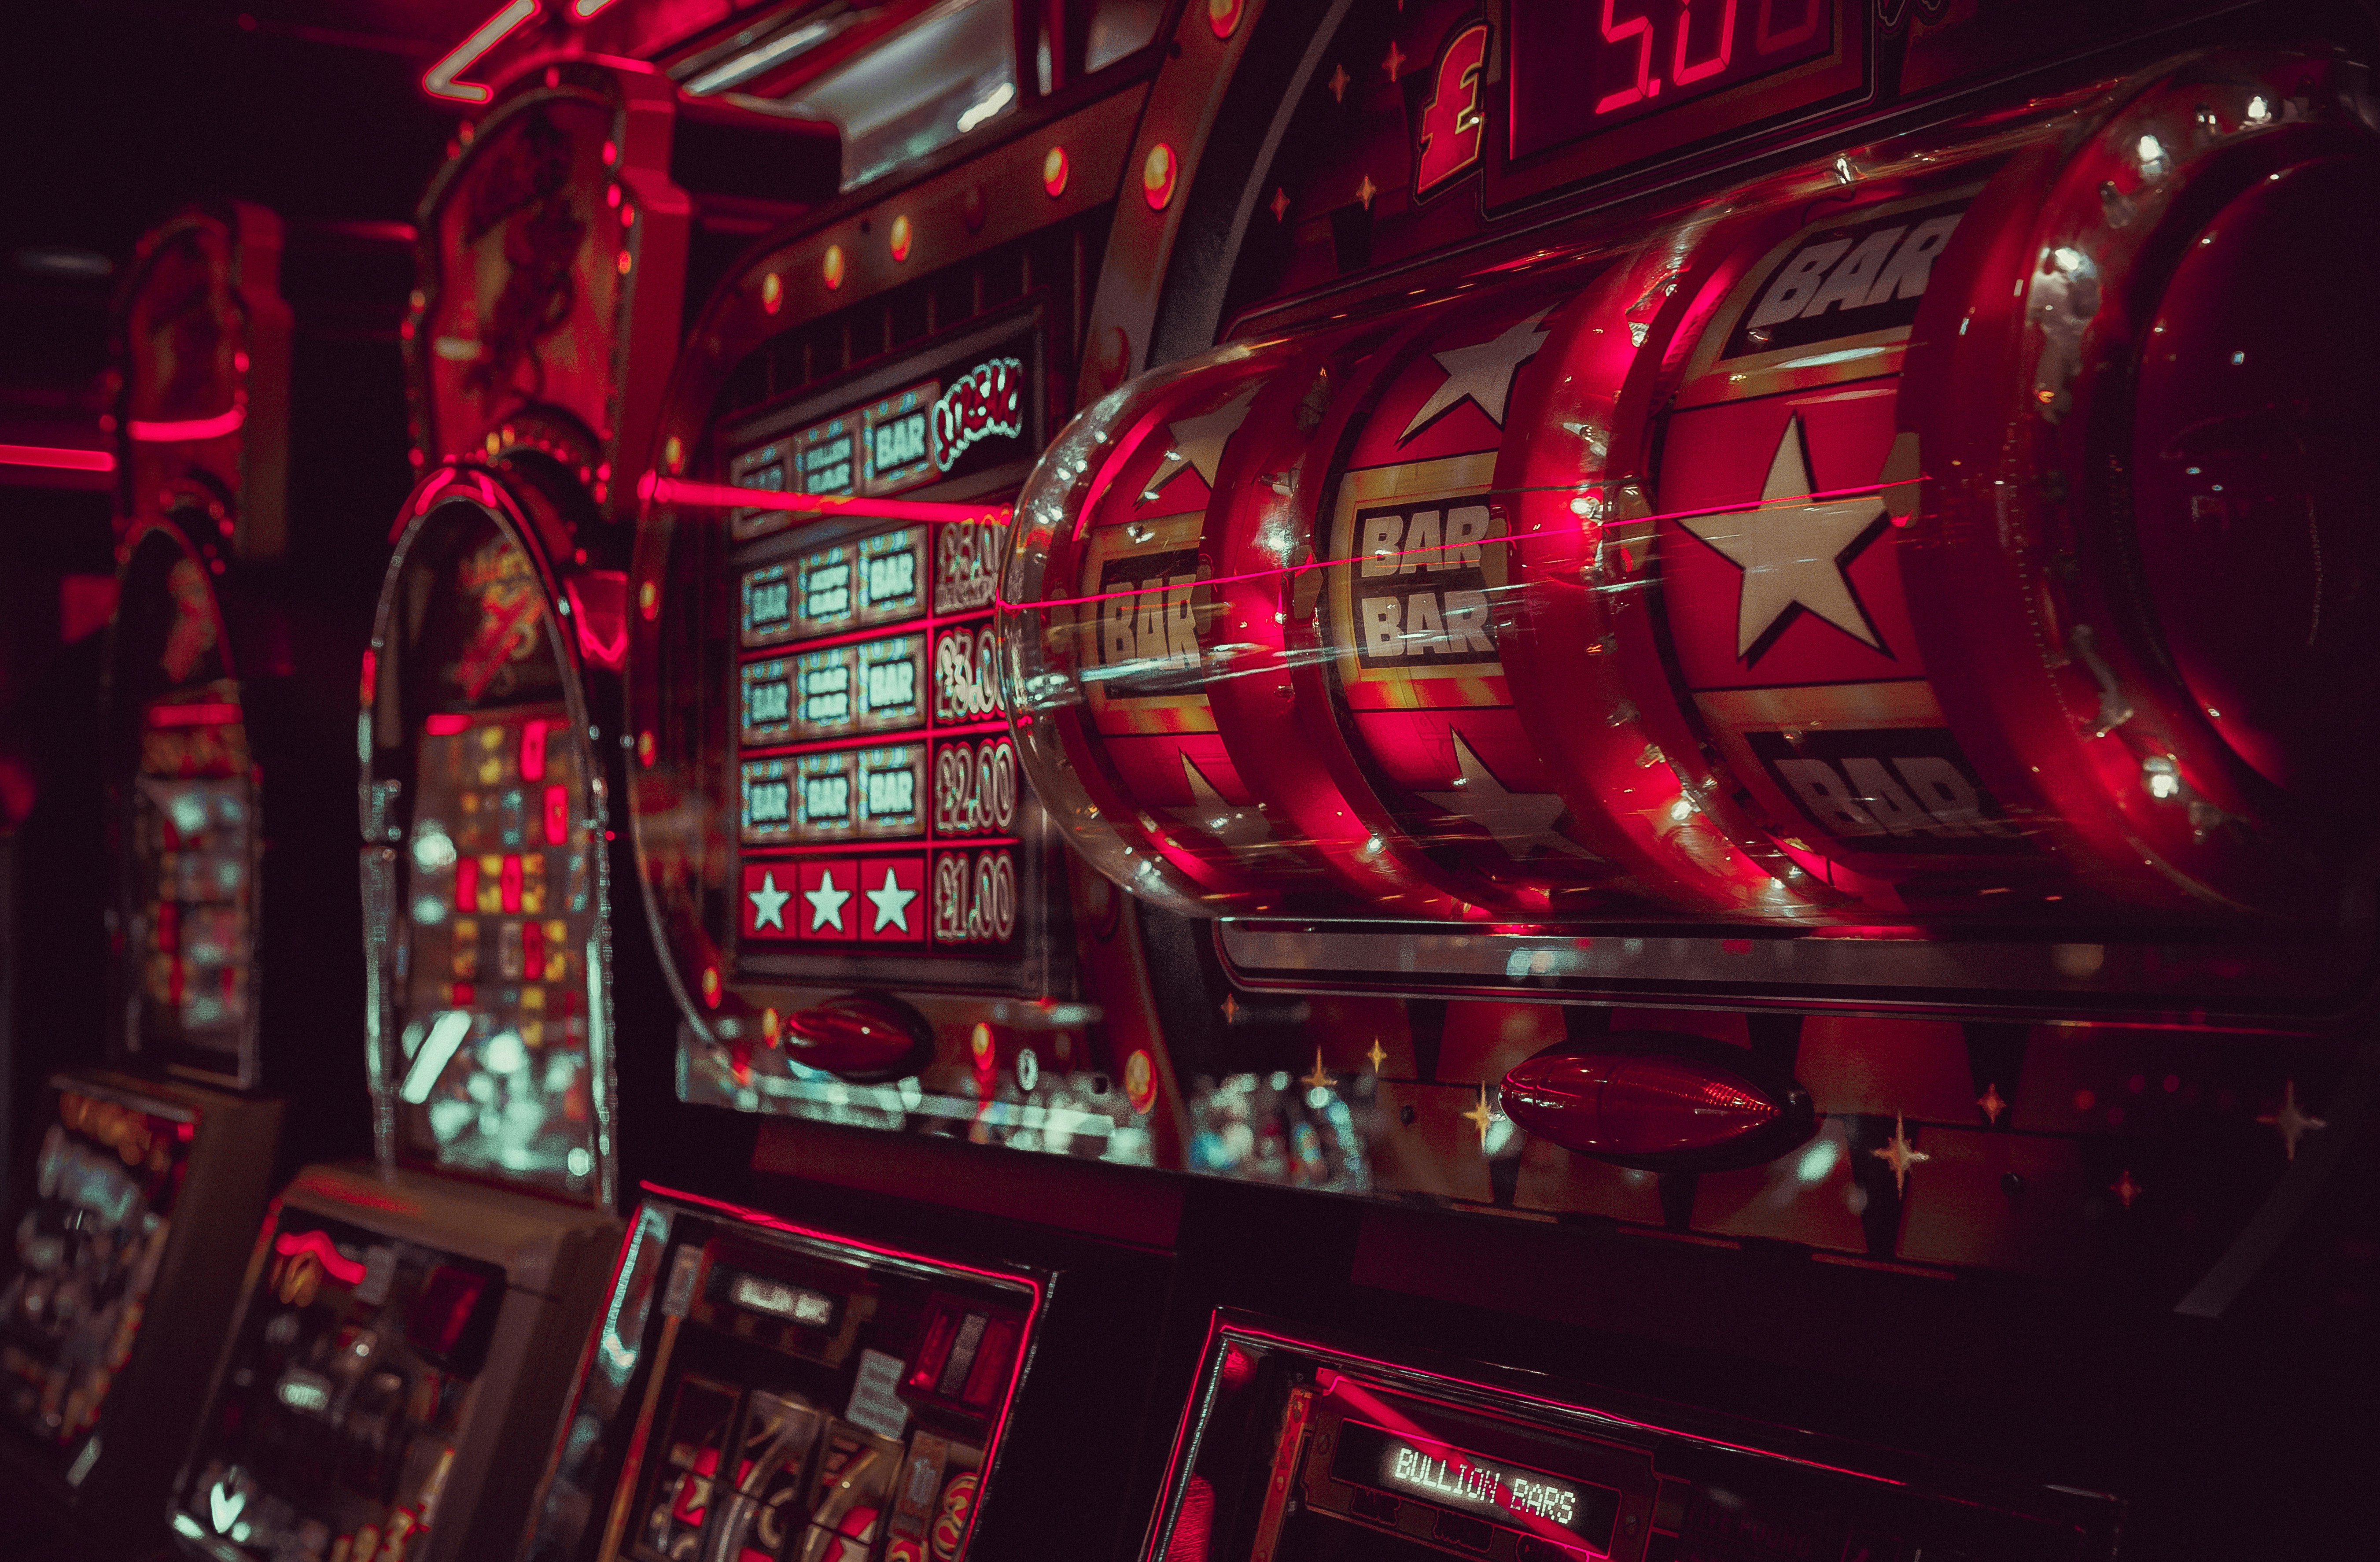 Take a photo of your arcade, play around with the lighting in Lightroom. It’s fun.